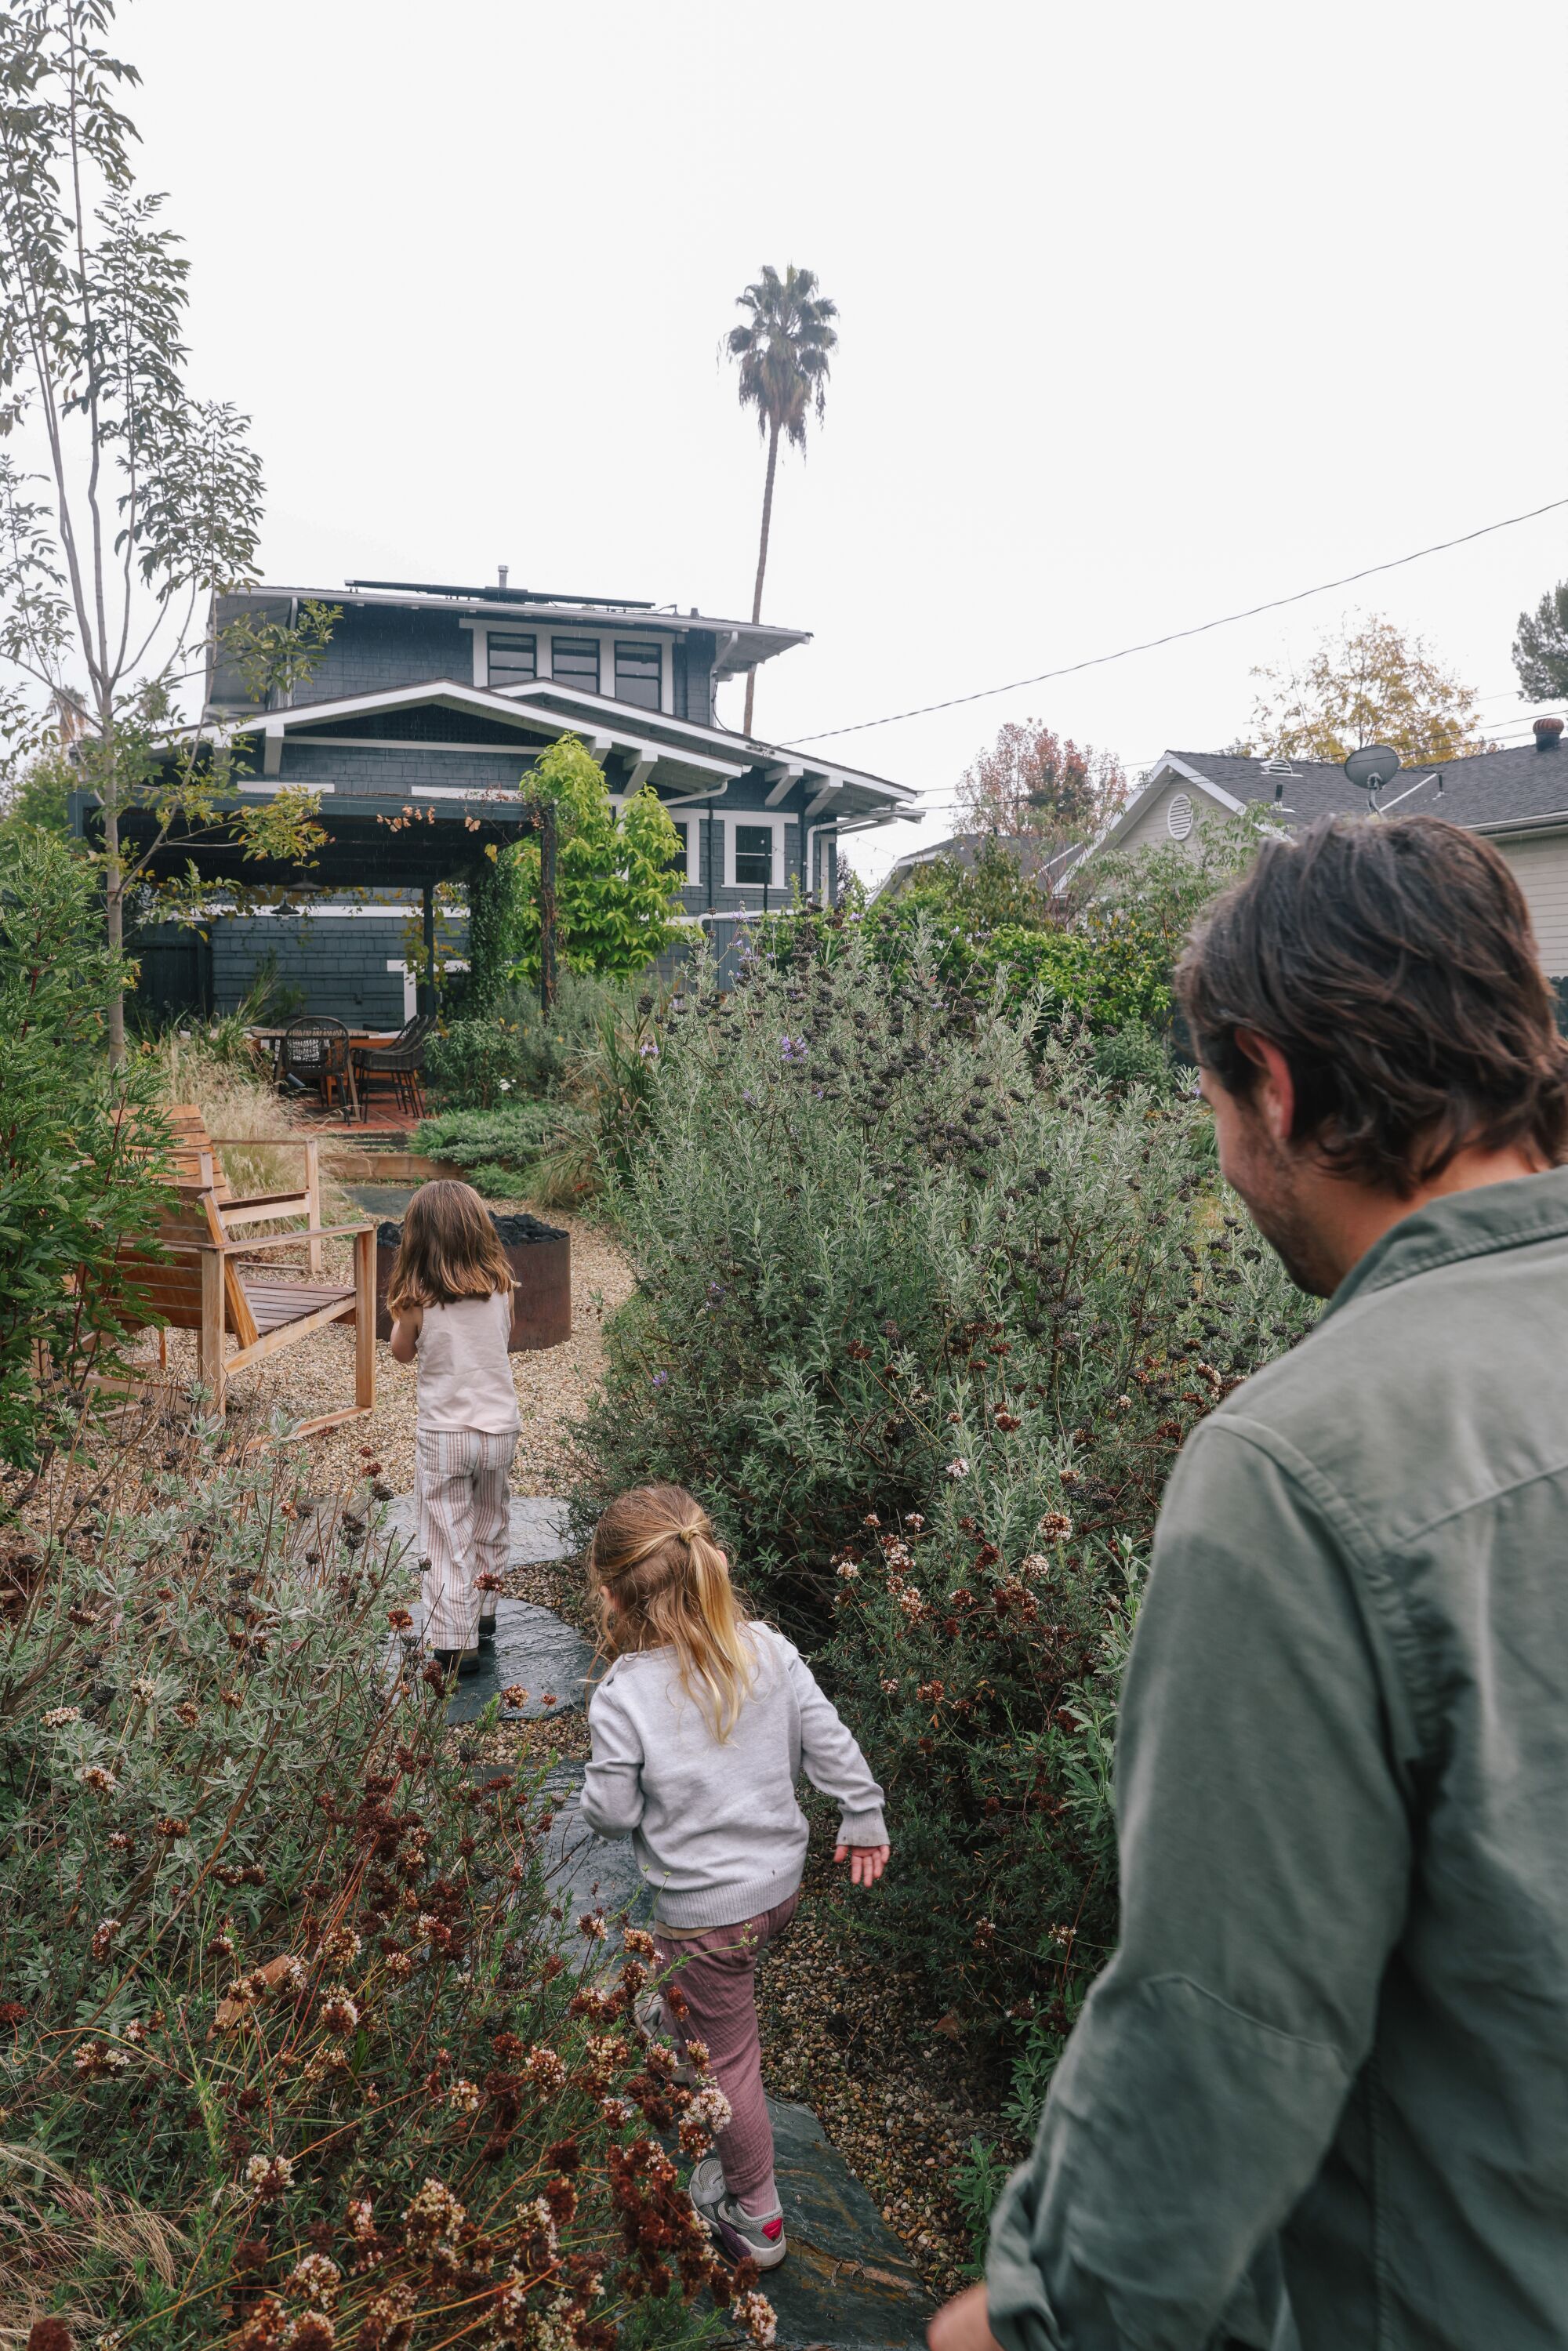 A father and his two young daughters walk through a garden toward a Craftsman house.